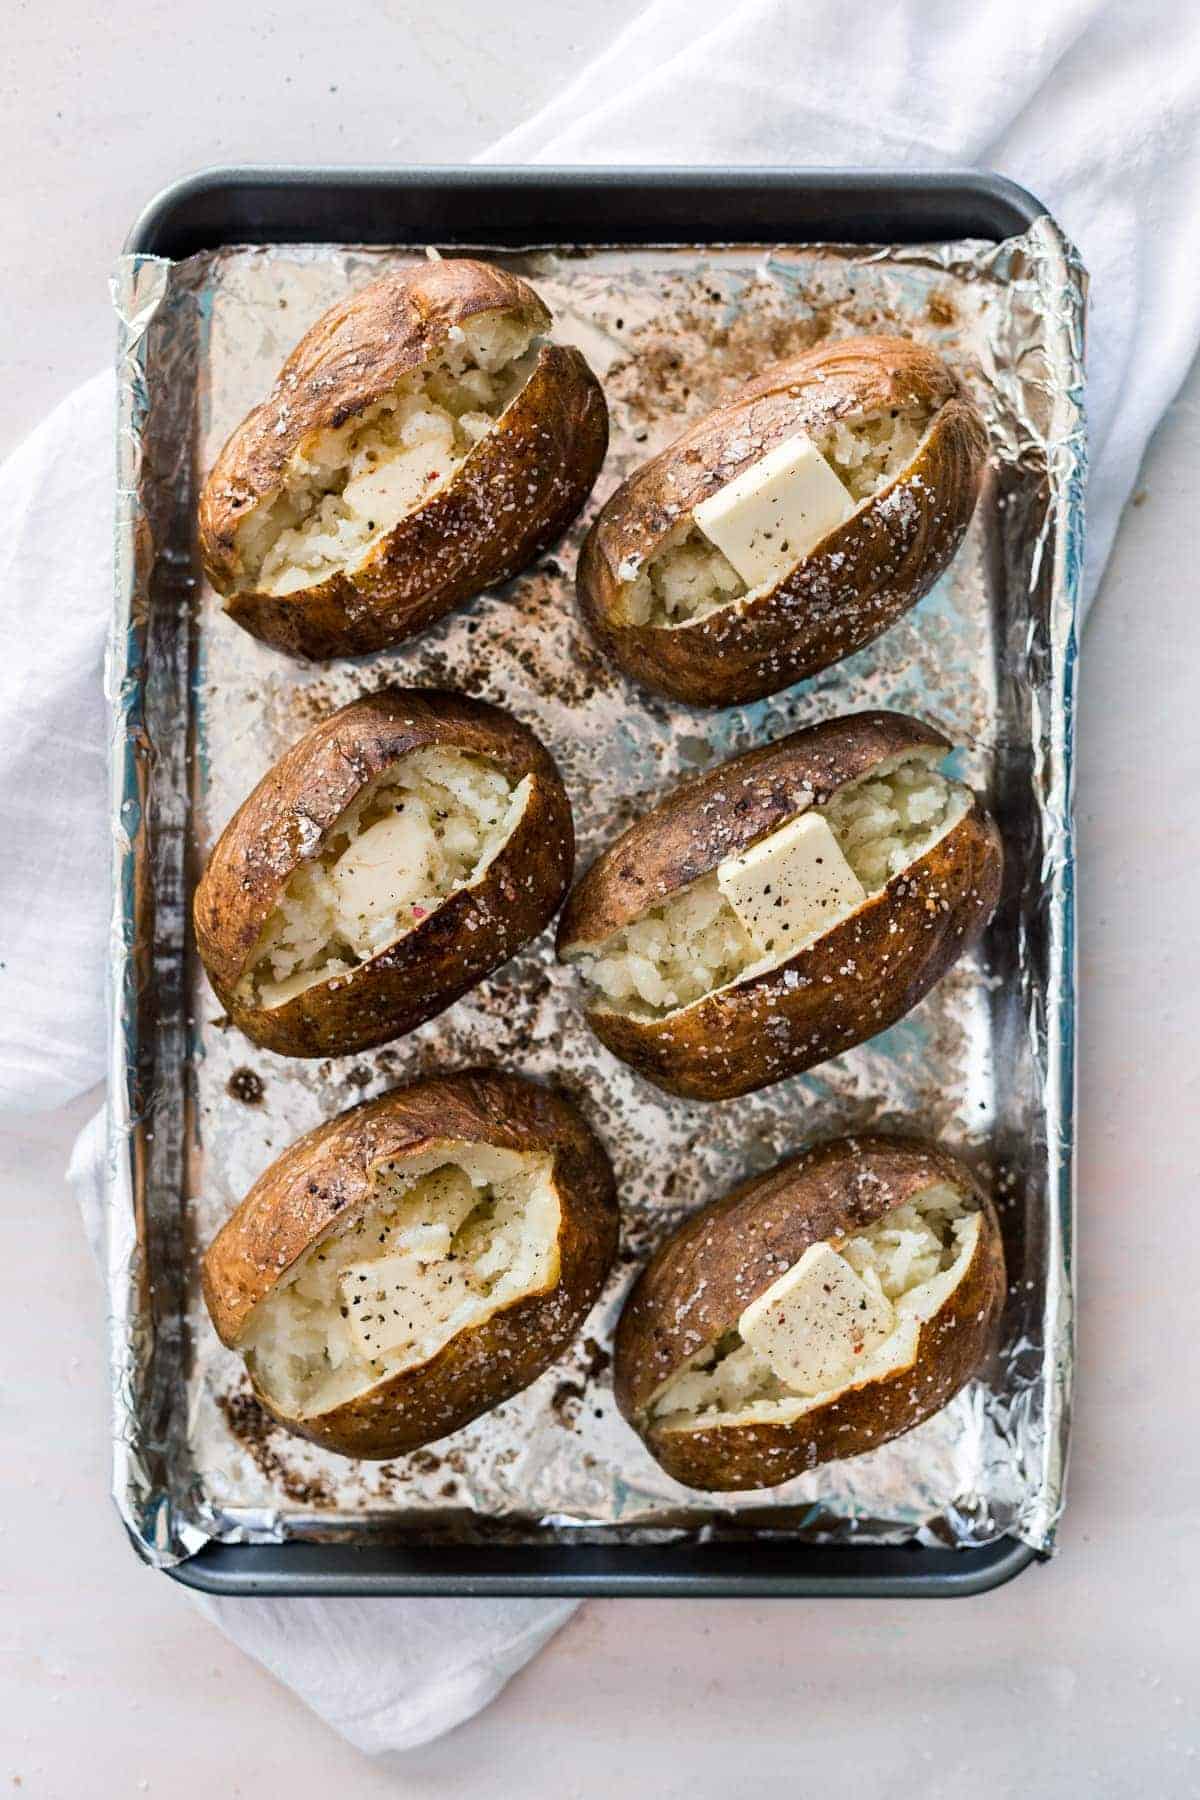 https://www.blessthismessplease.com/wp-content/uploads/2018/05/The-Perfect-Baked-Potato-1.jpg